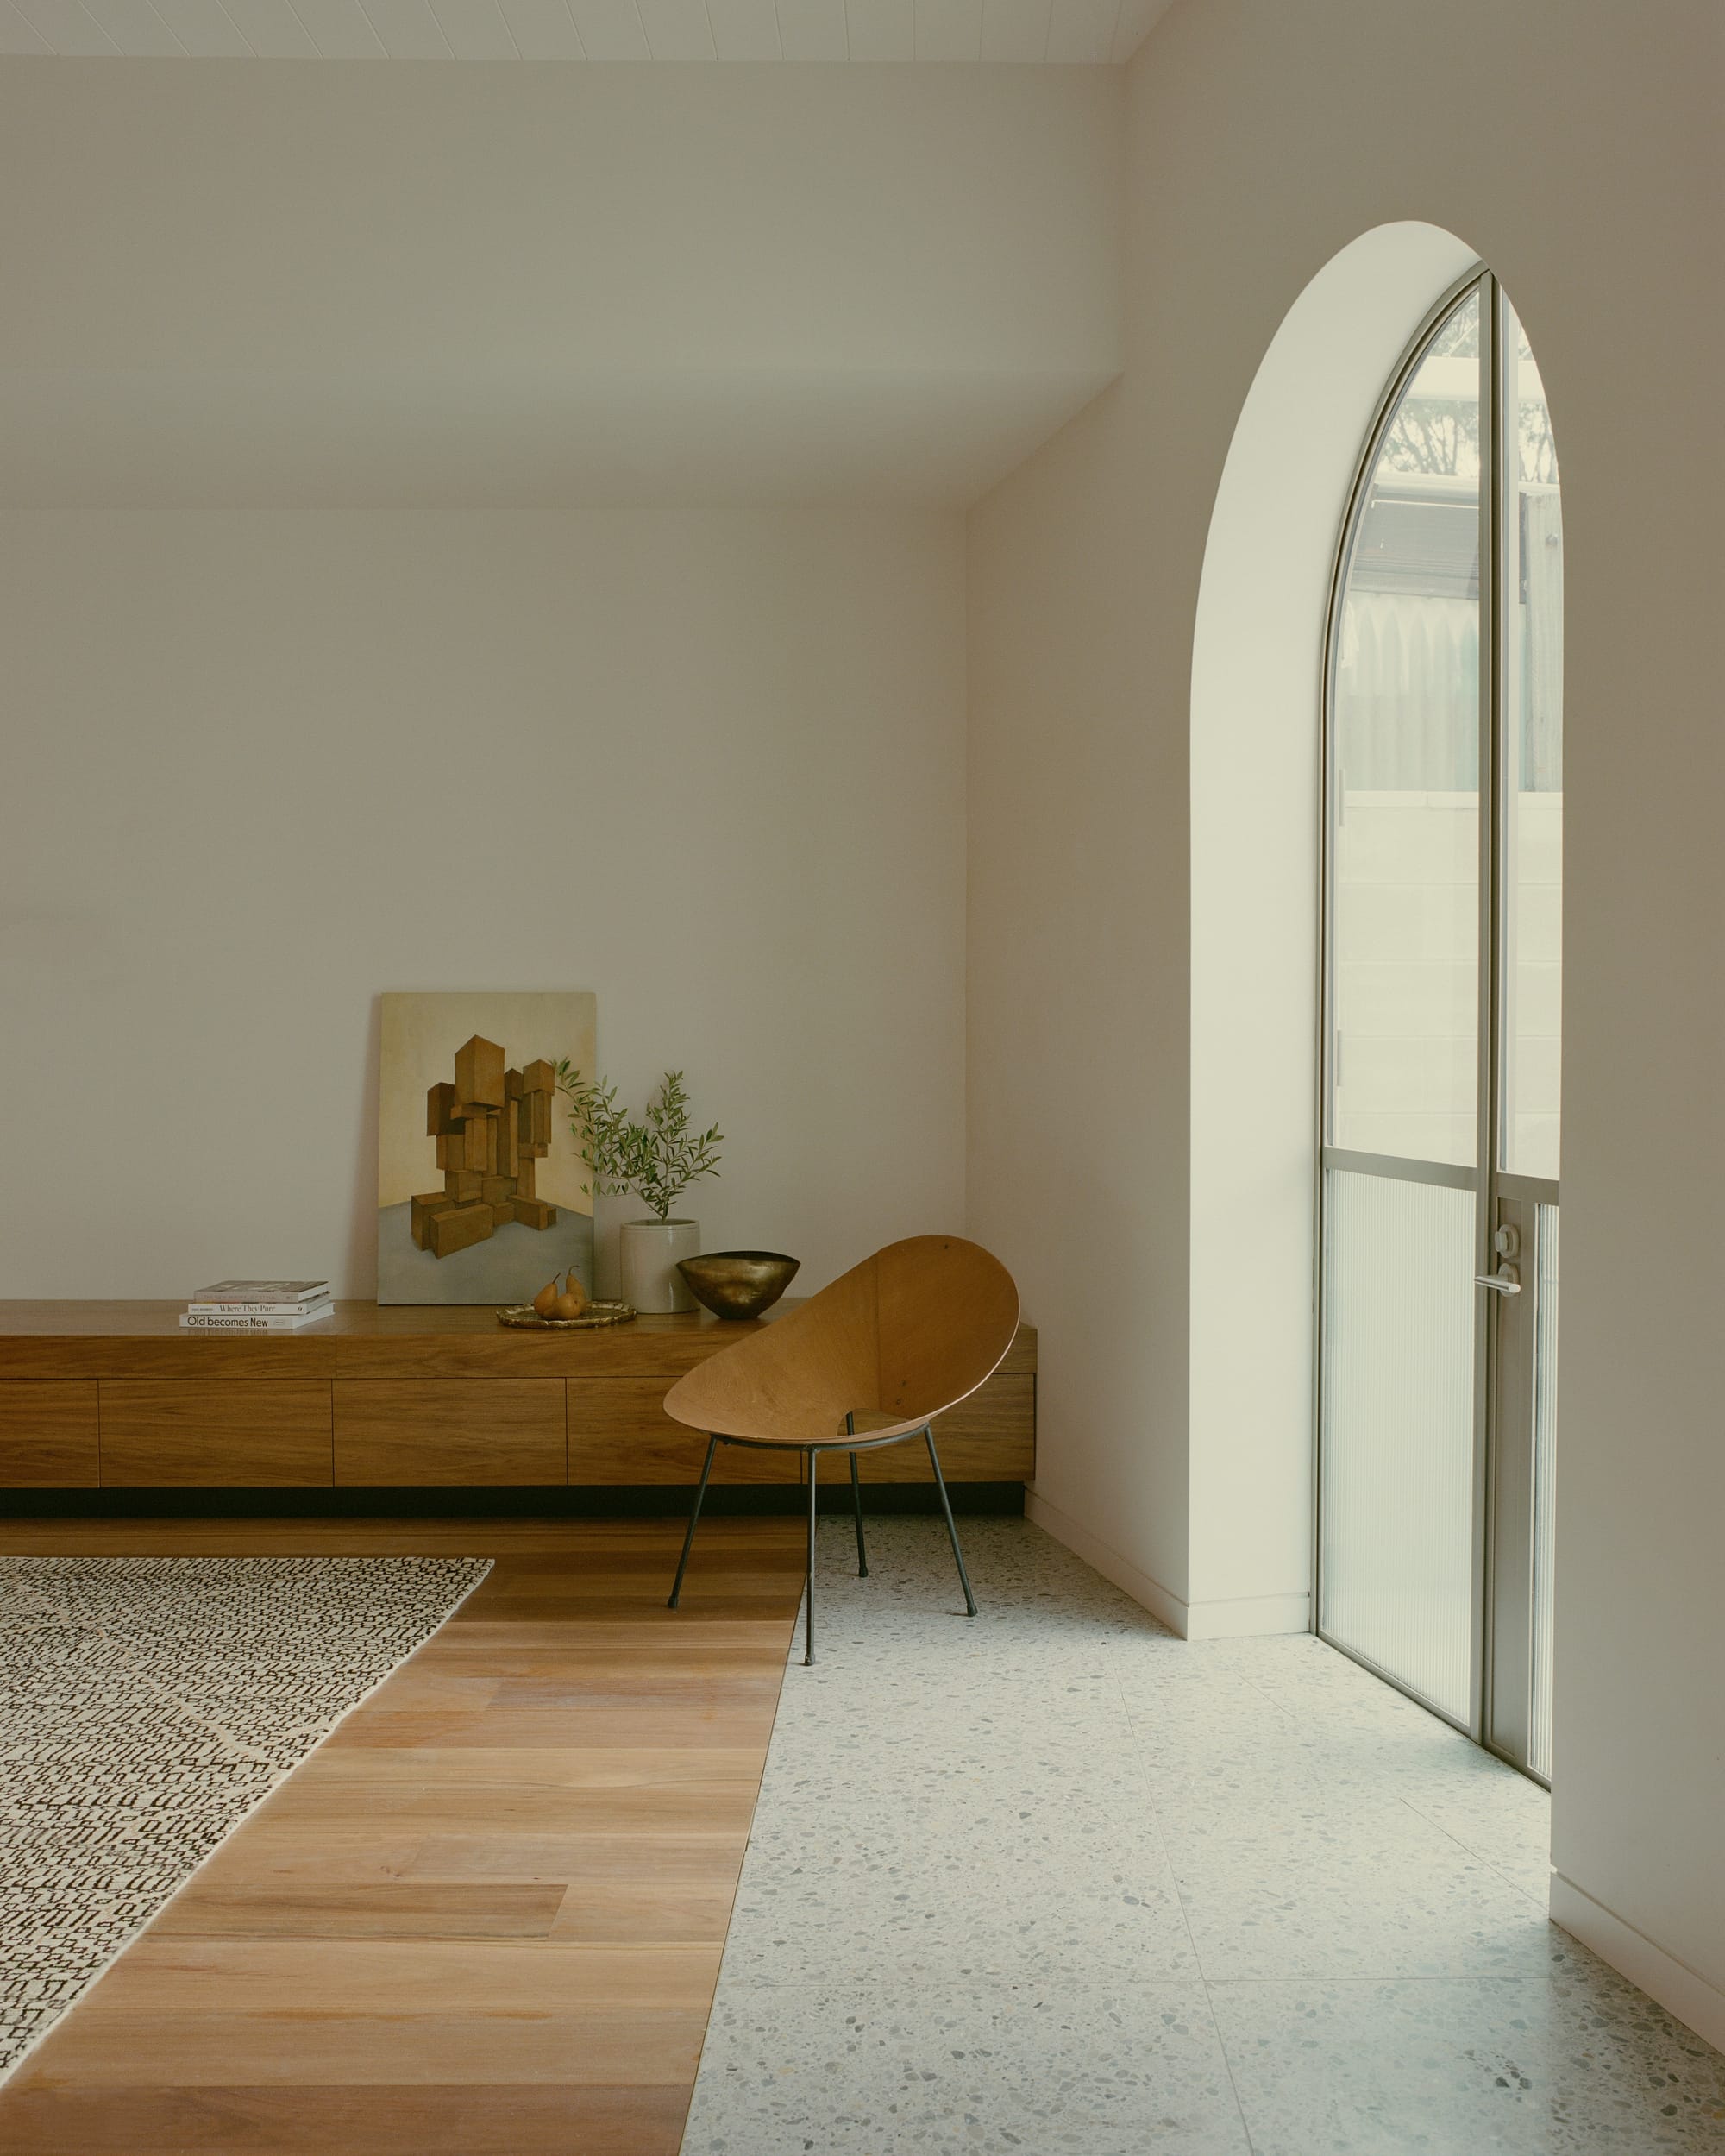  Inside the building, a simple, well-lit room with a large arched window, a wooden console table, a bench, and minimalistic decor is shown.